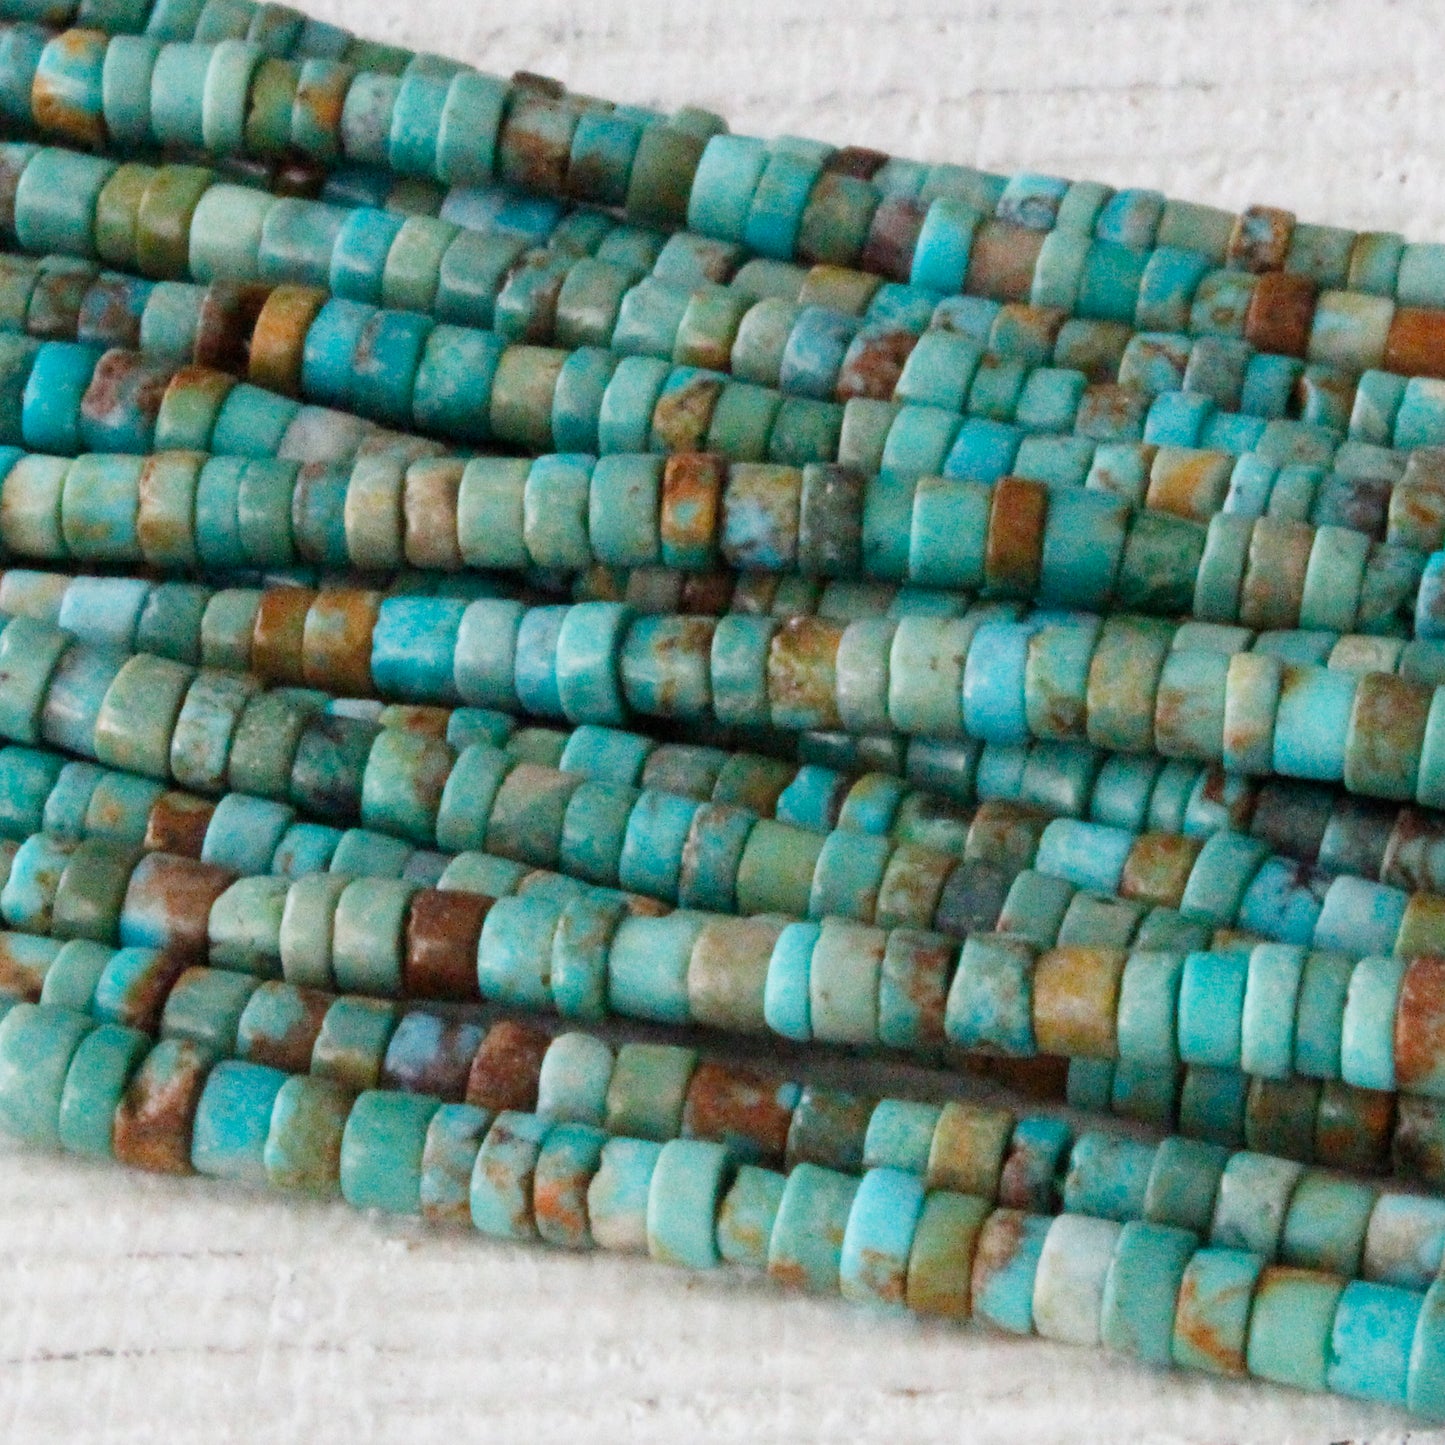 2x3mm Tiny Turquoise Heishi Beads - 15 Inches